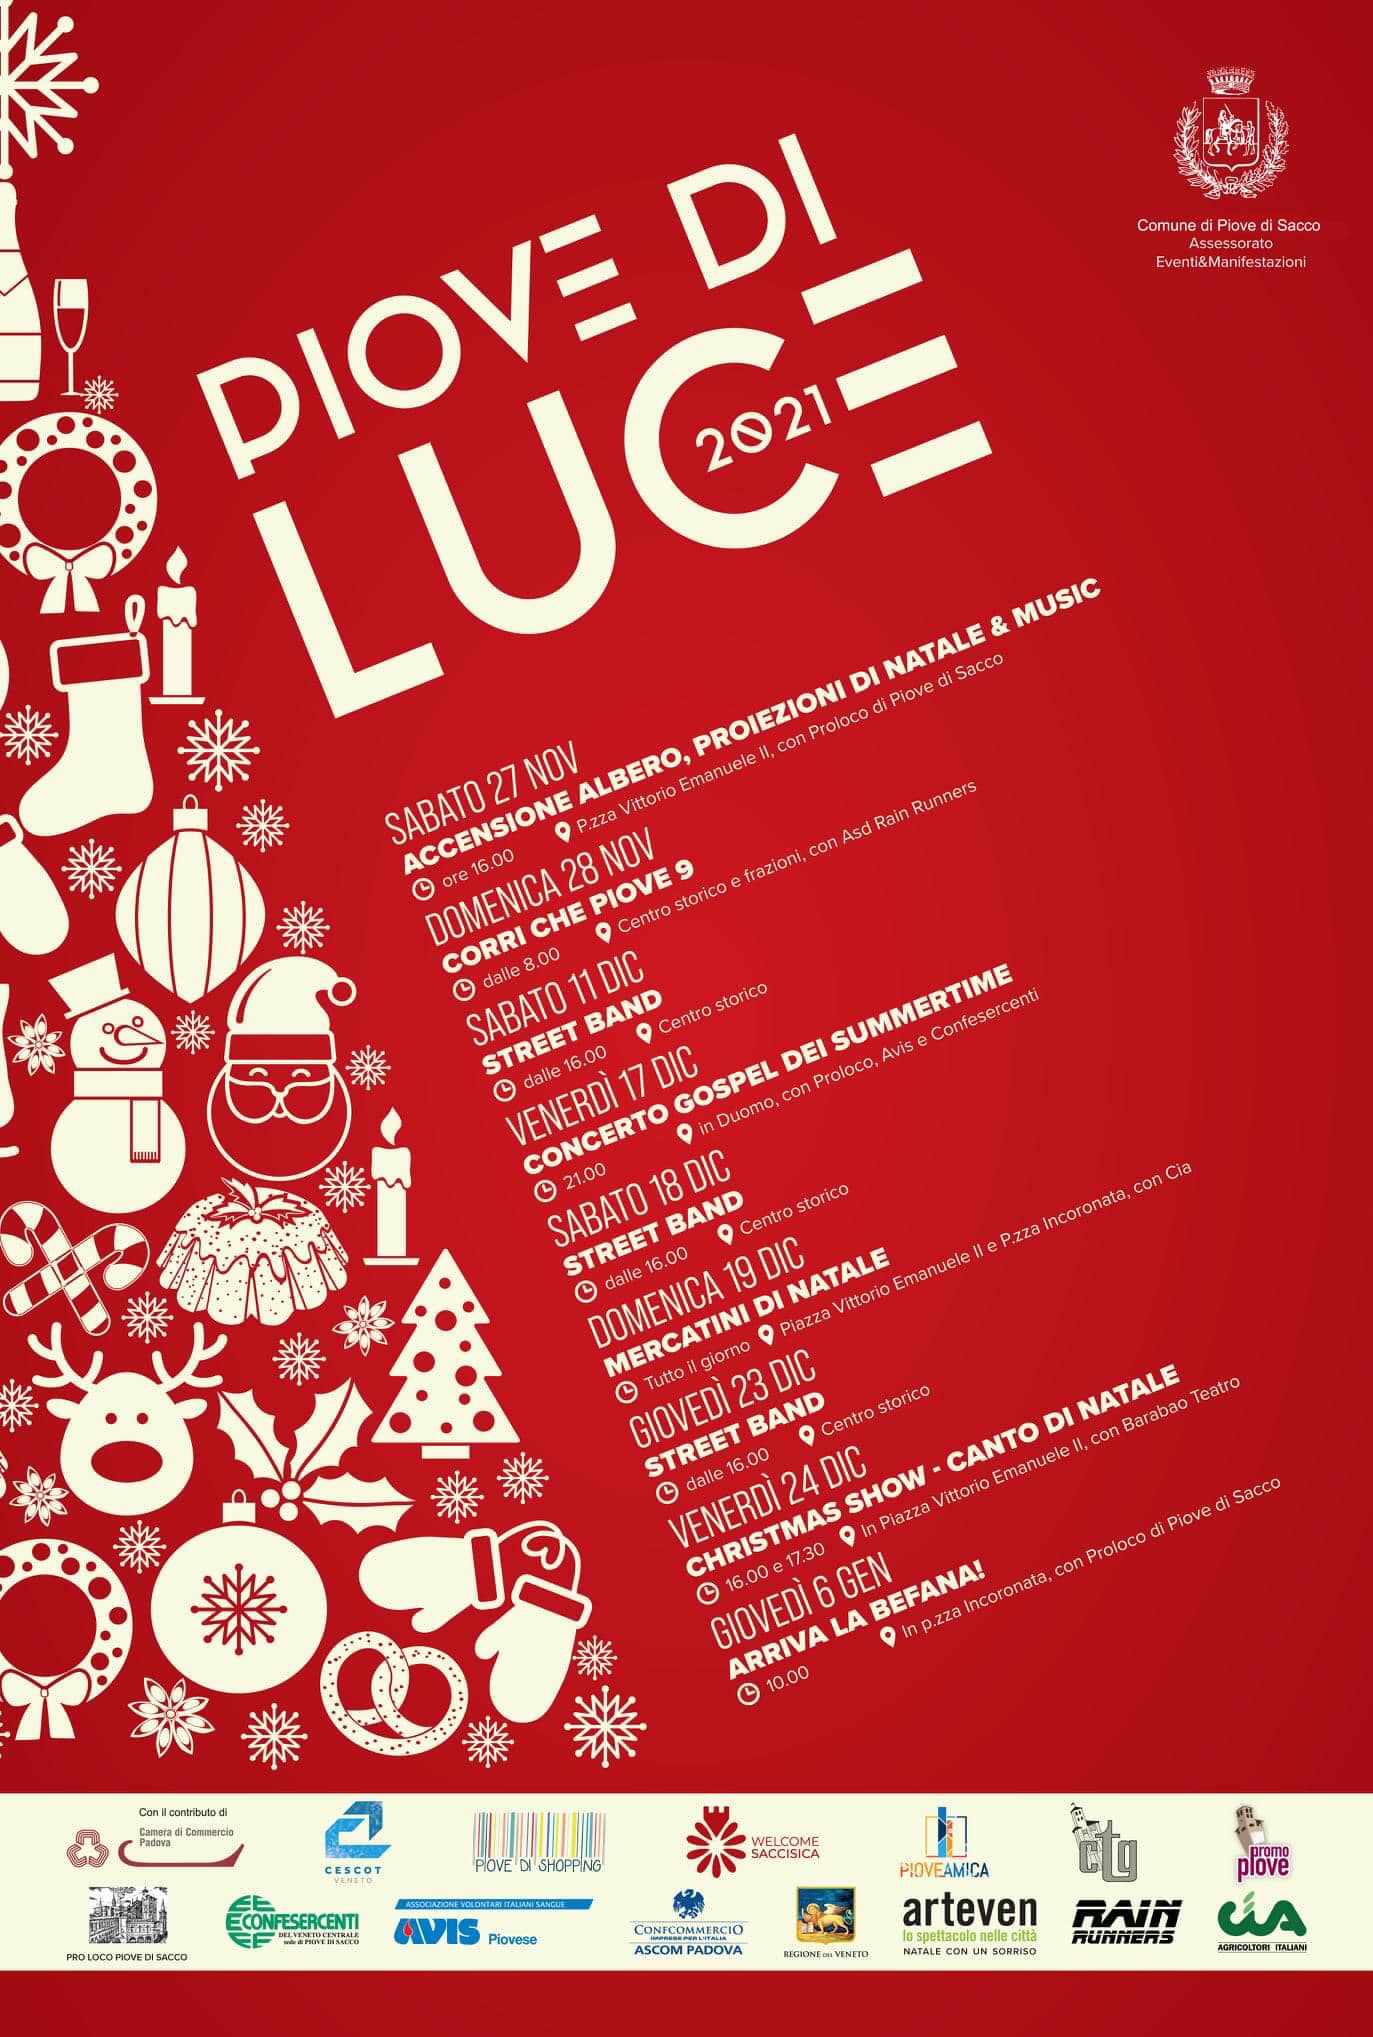 Read more about the article Piove di Luce